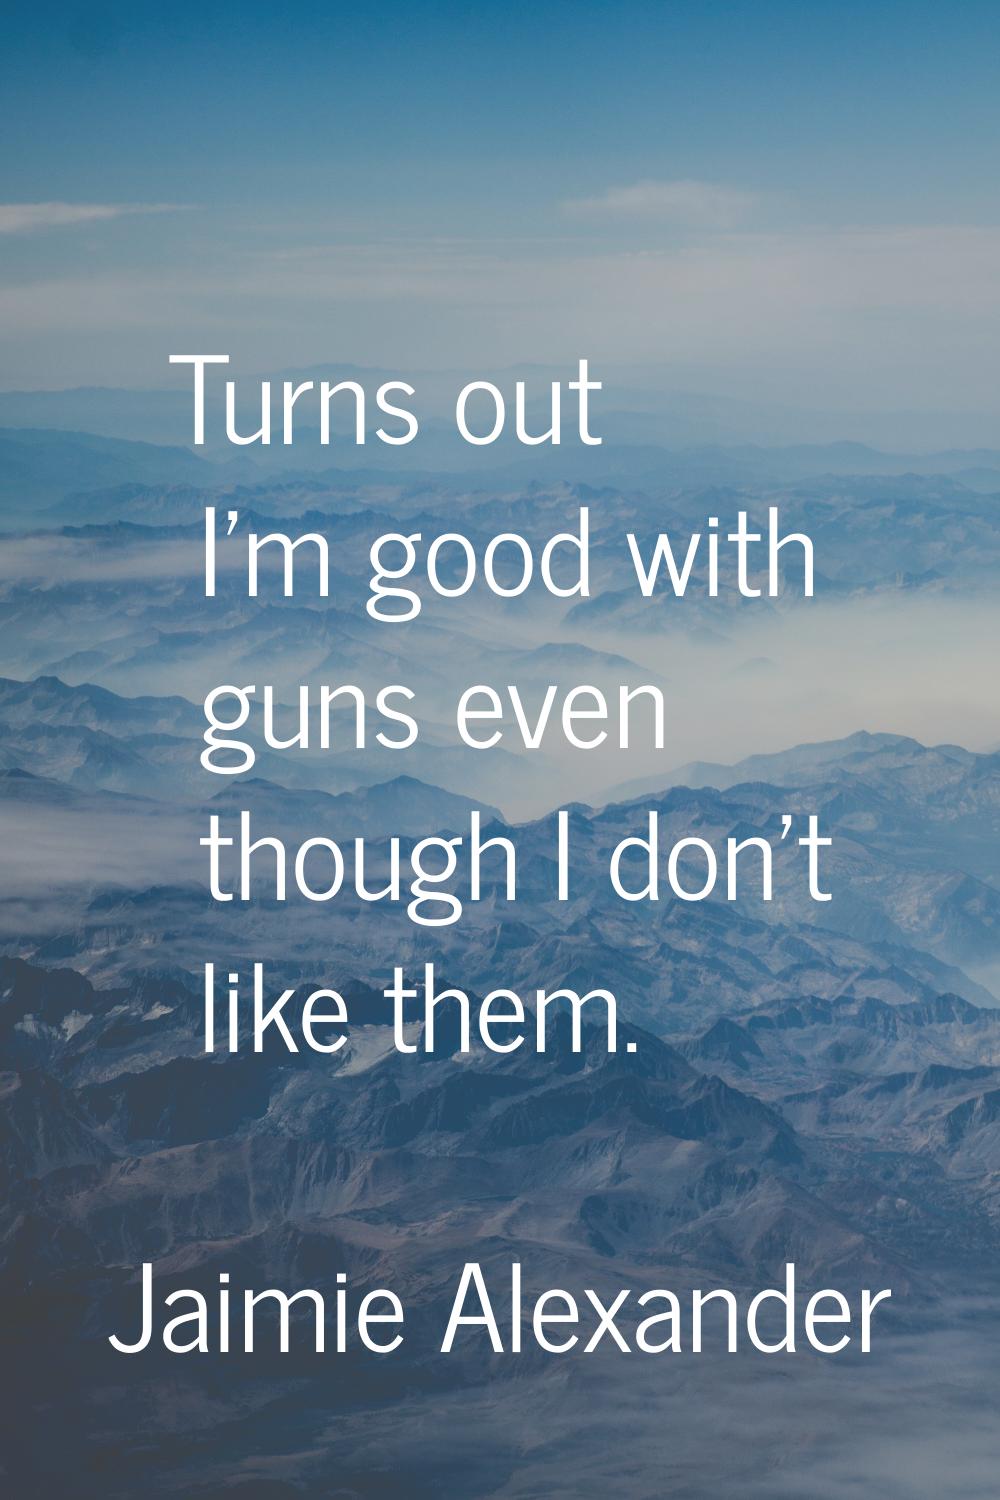 Turns out I'm good with guns even though I don't like them.